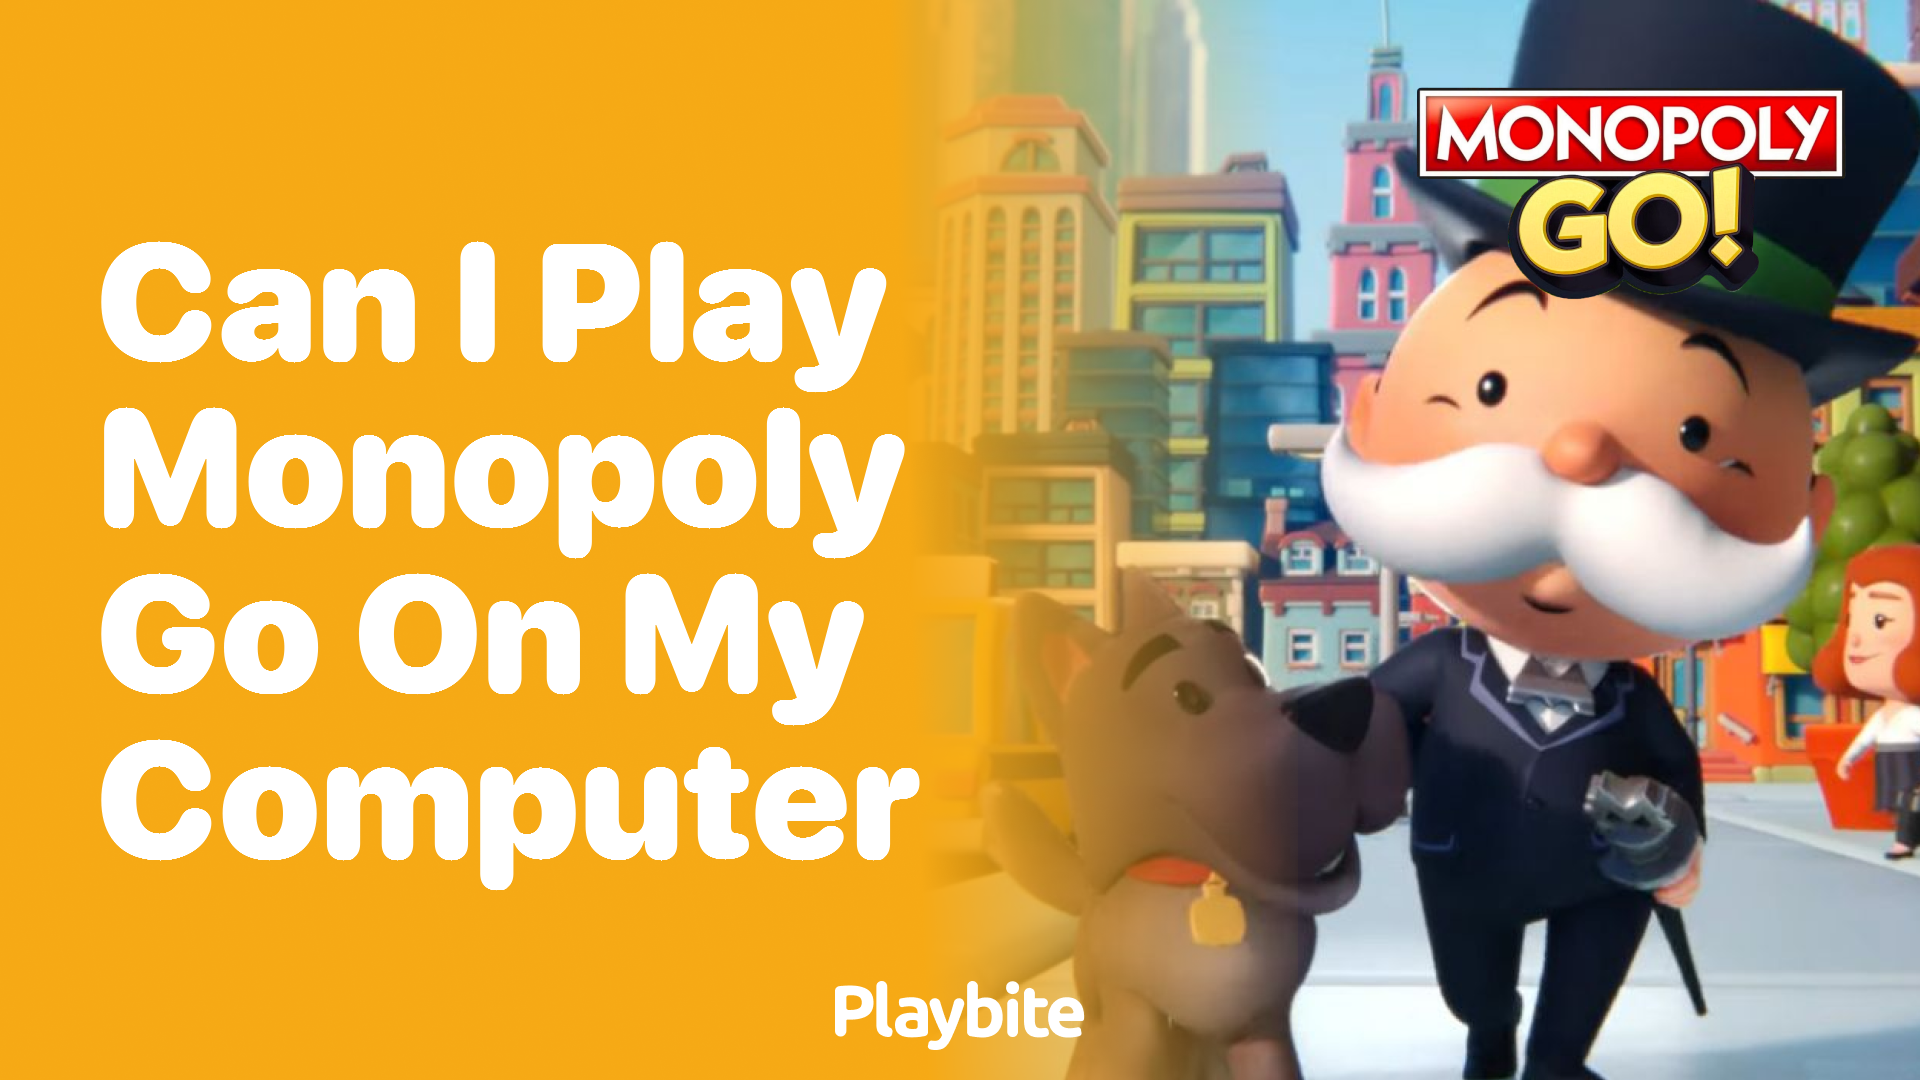 Can I Play Monopoly Go on My Computer?